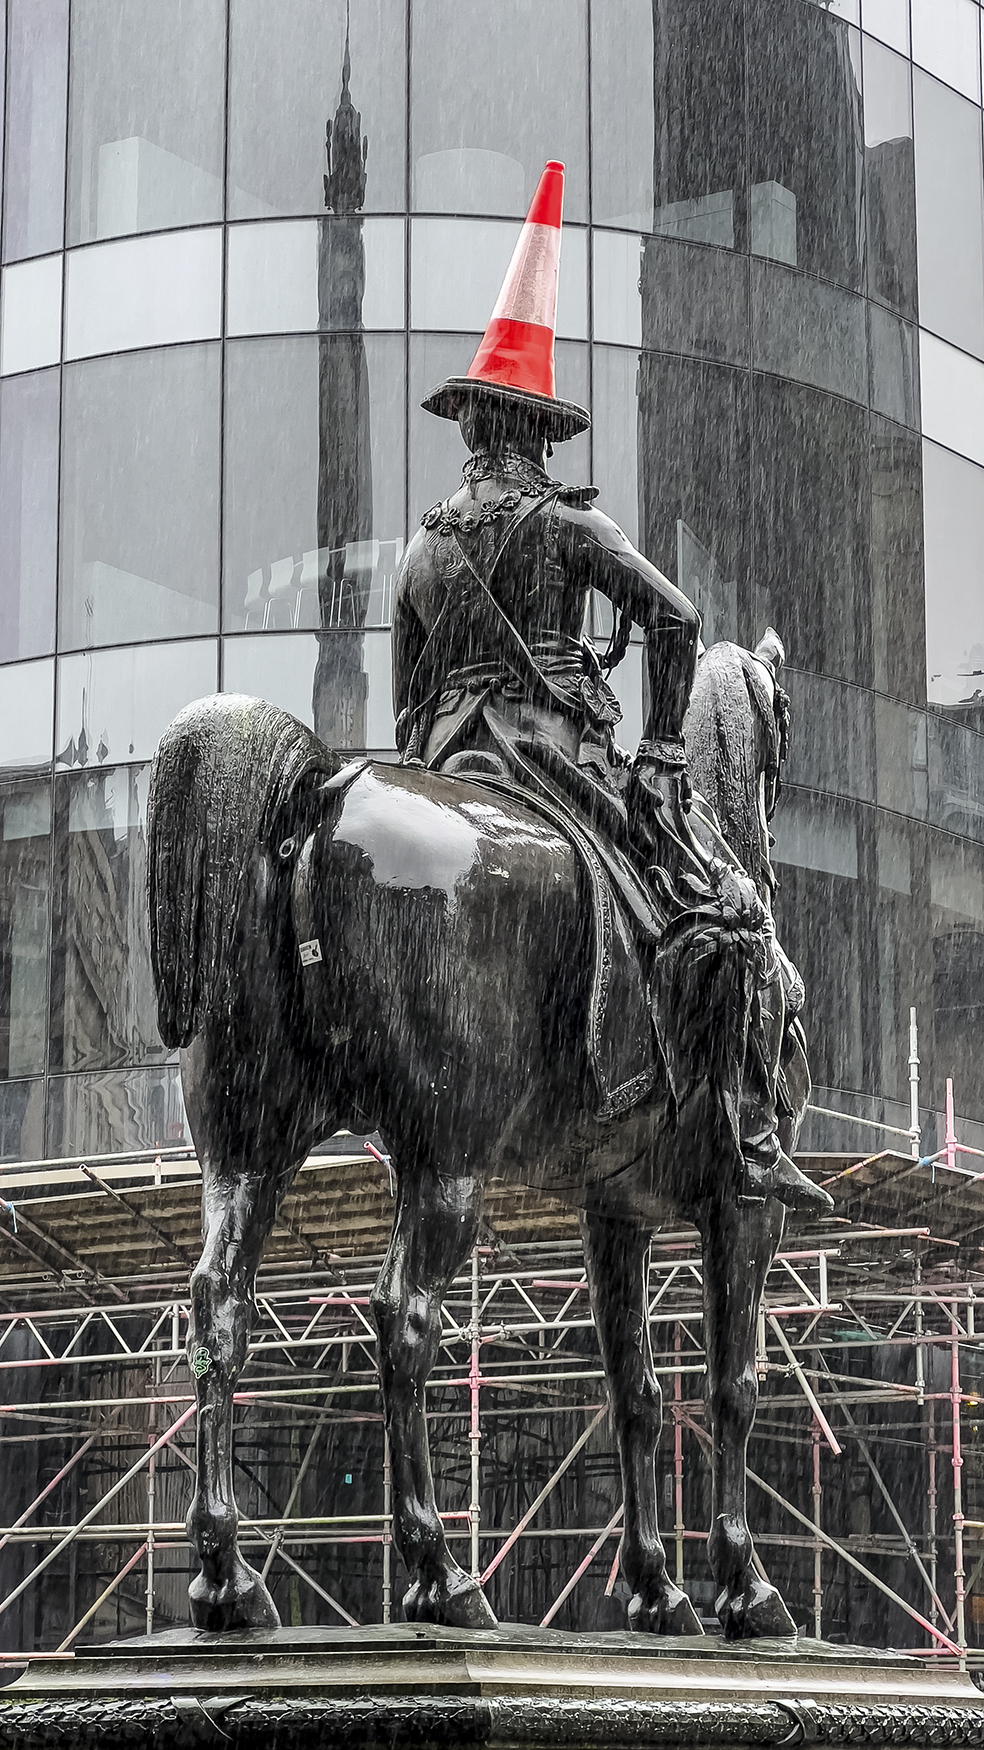 The Duke of Wellington's Hat - From the early 1980’s through to the present day, the traffic cone adorning the statue of the Duke of Wellington in Glasgow has become synonymous with Glaswegian humour as well as an international landmark